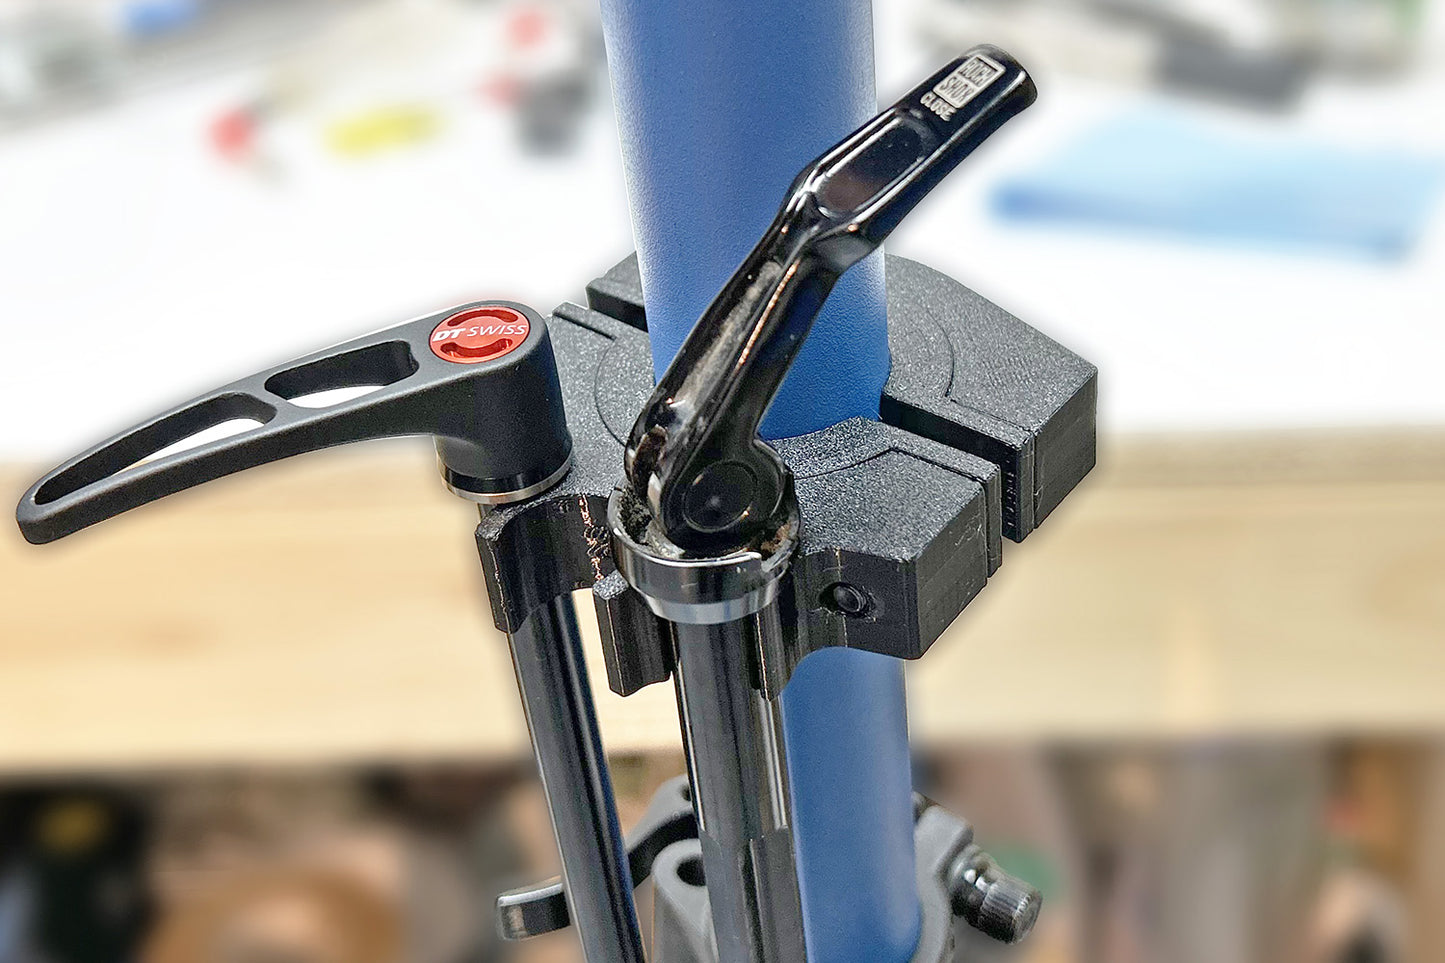 Momentum Cycle's 3D printed Axle Holder being used by a Home Mechanic on a repair bike stand.